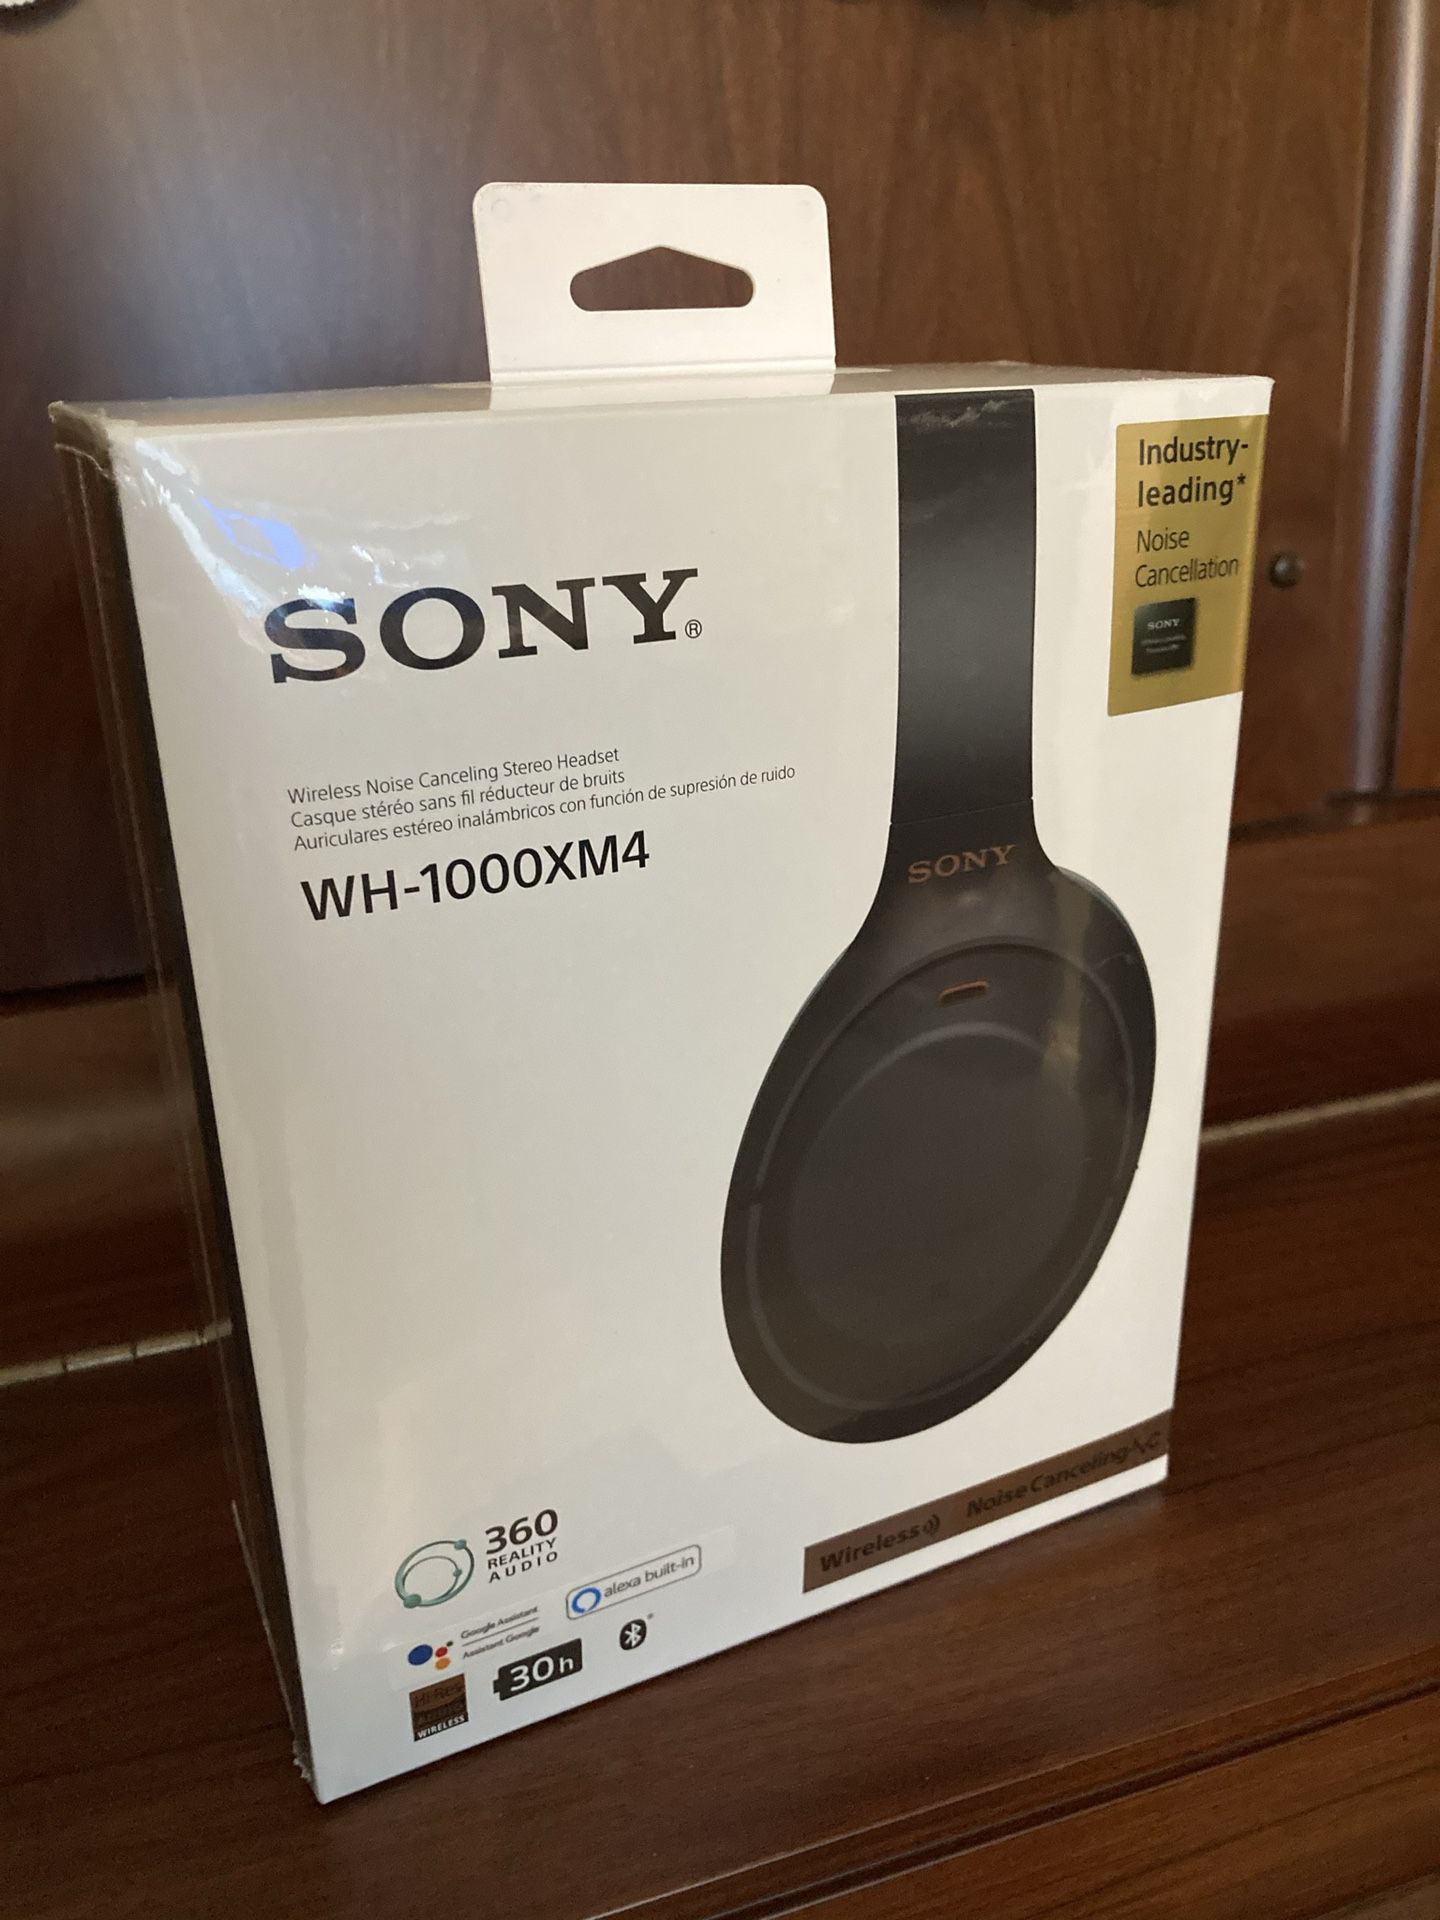 NEW Sony WH-1000XM4 Noise-cancelling Wireless Headphones, Black